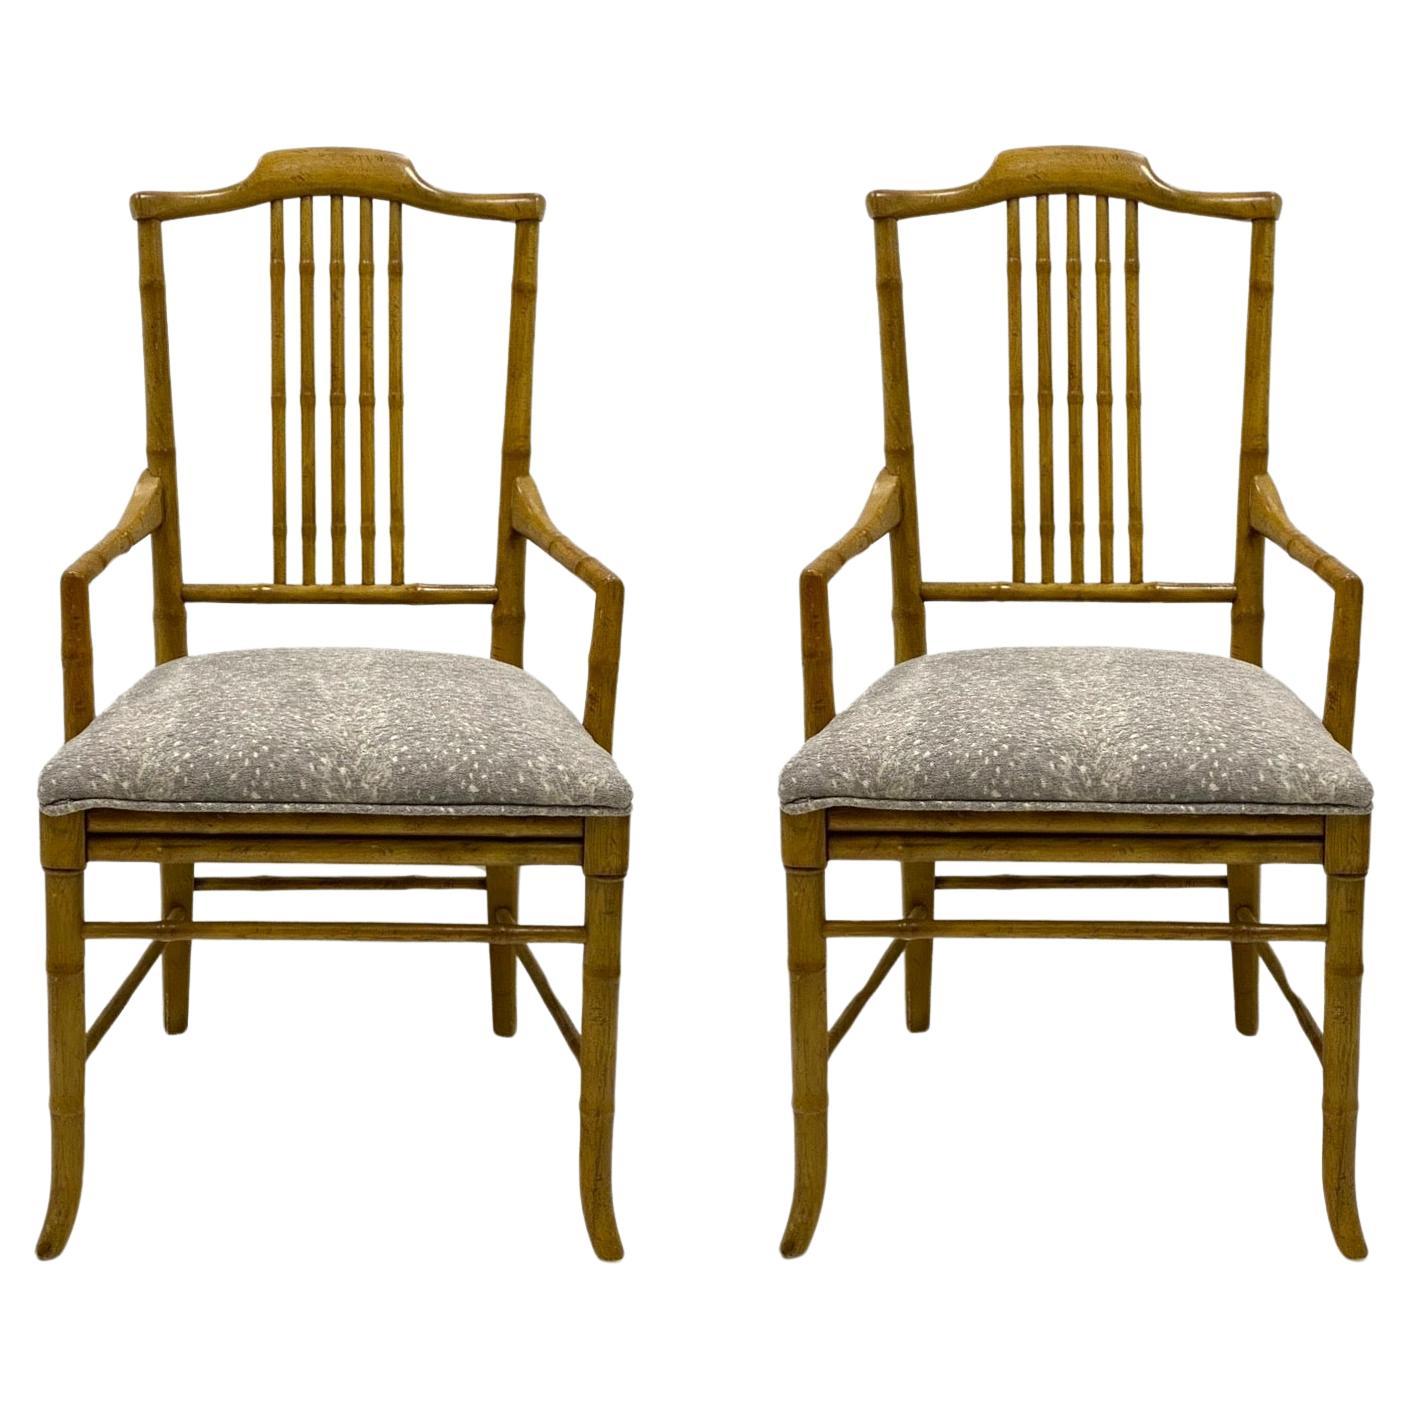 1970s Regency Style Faux Bamboo Bergere Armchairs In Grey Fawn Upholstery -Pair For Sale